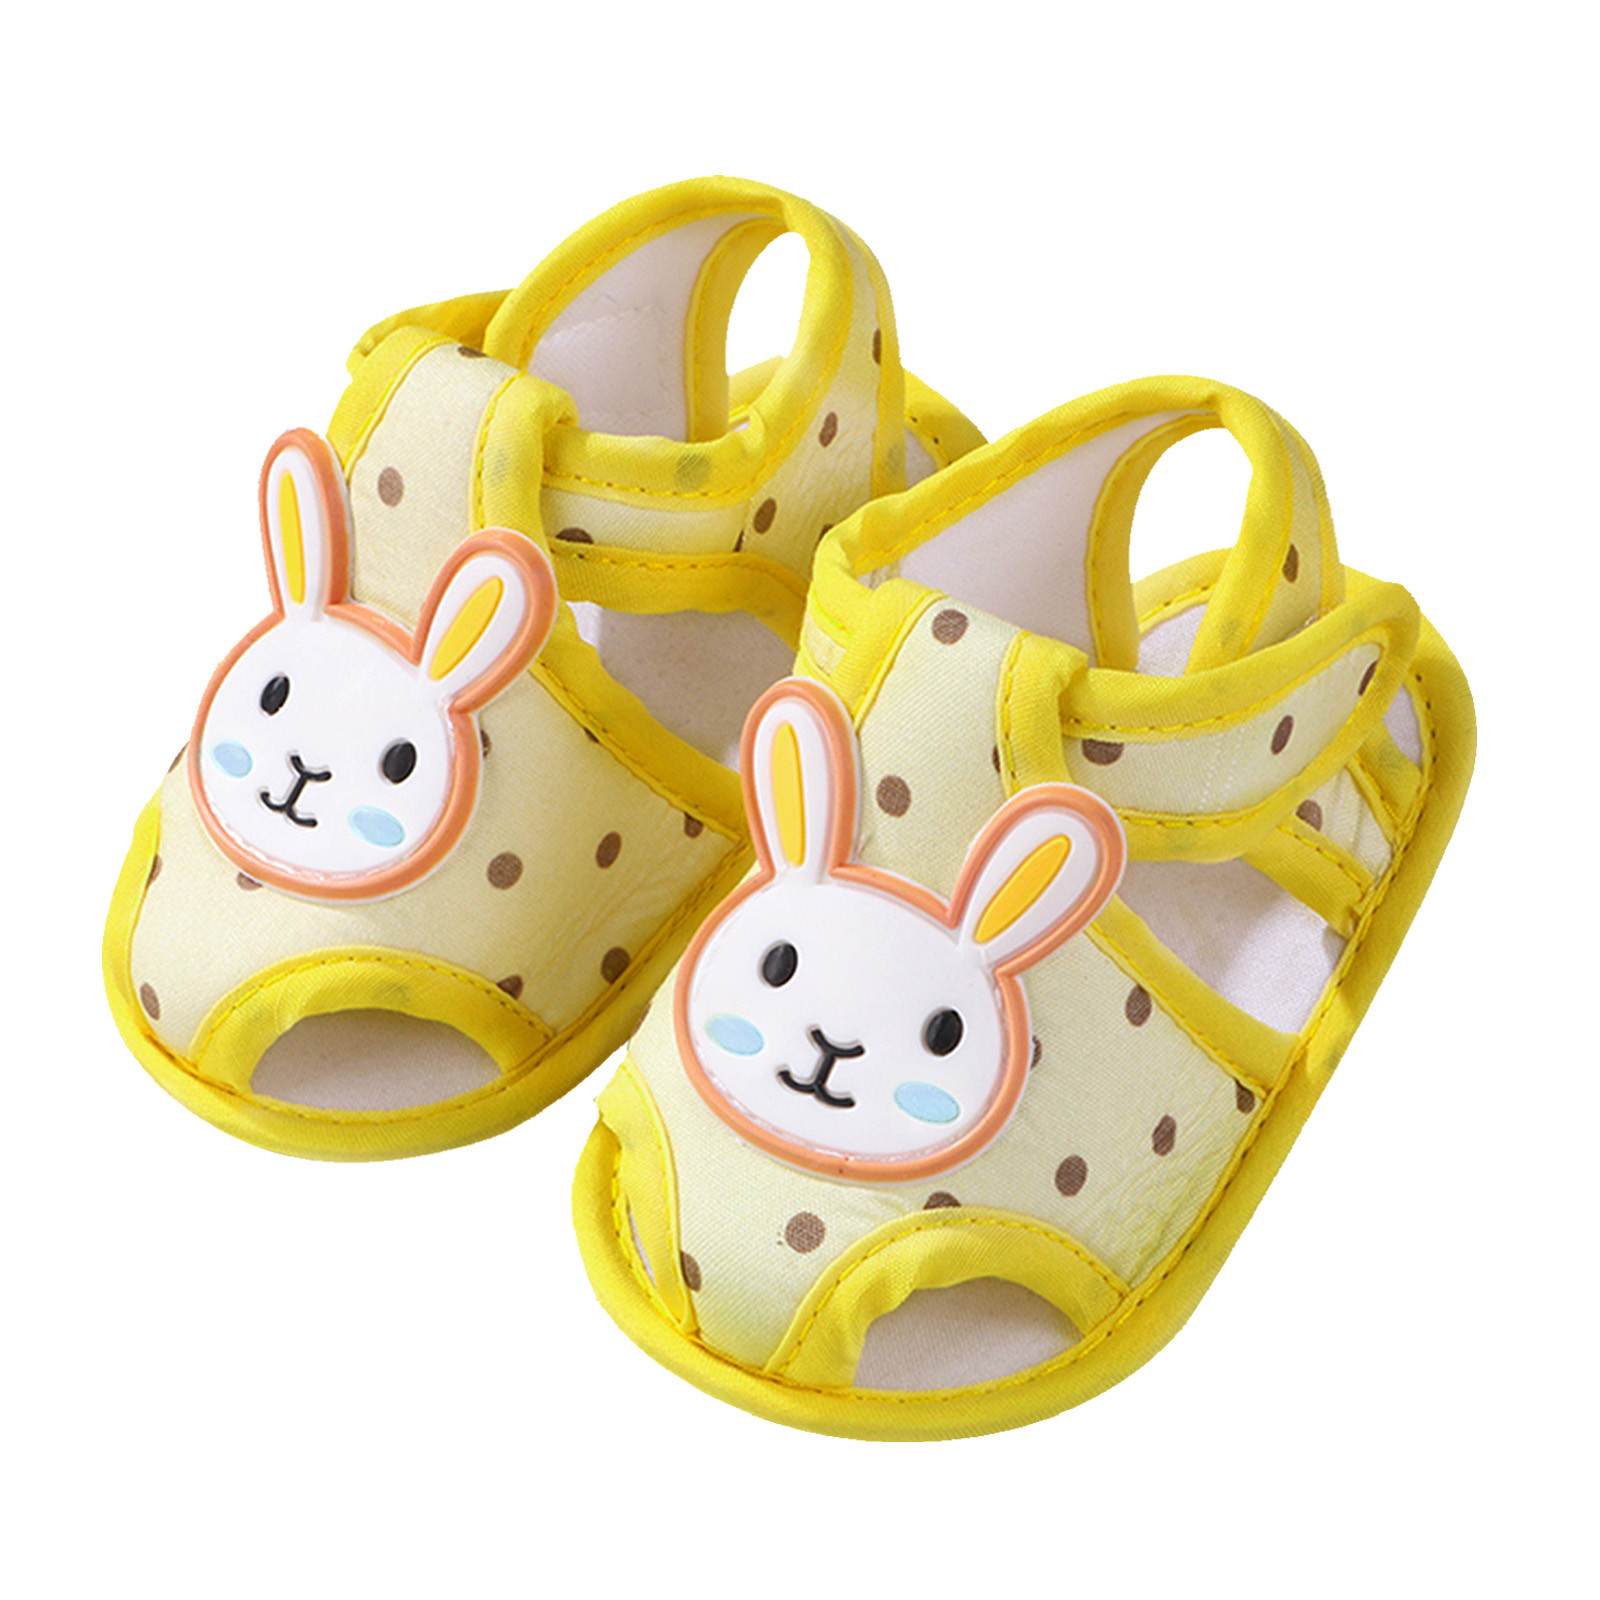 Baby Girls Boys Soft Toddler Shoes Toddler Walkers Shoes Cartoon Rabbit ...